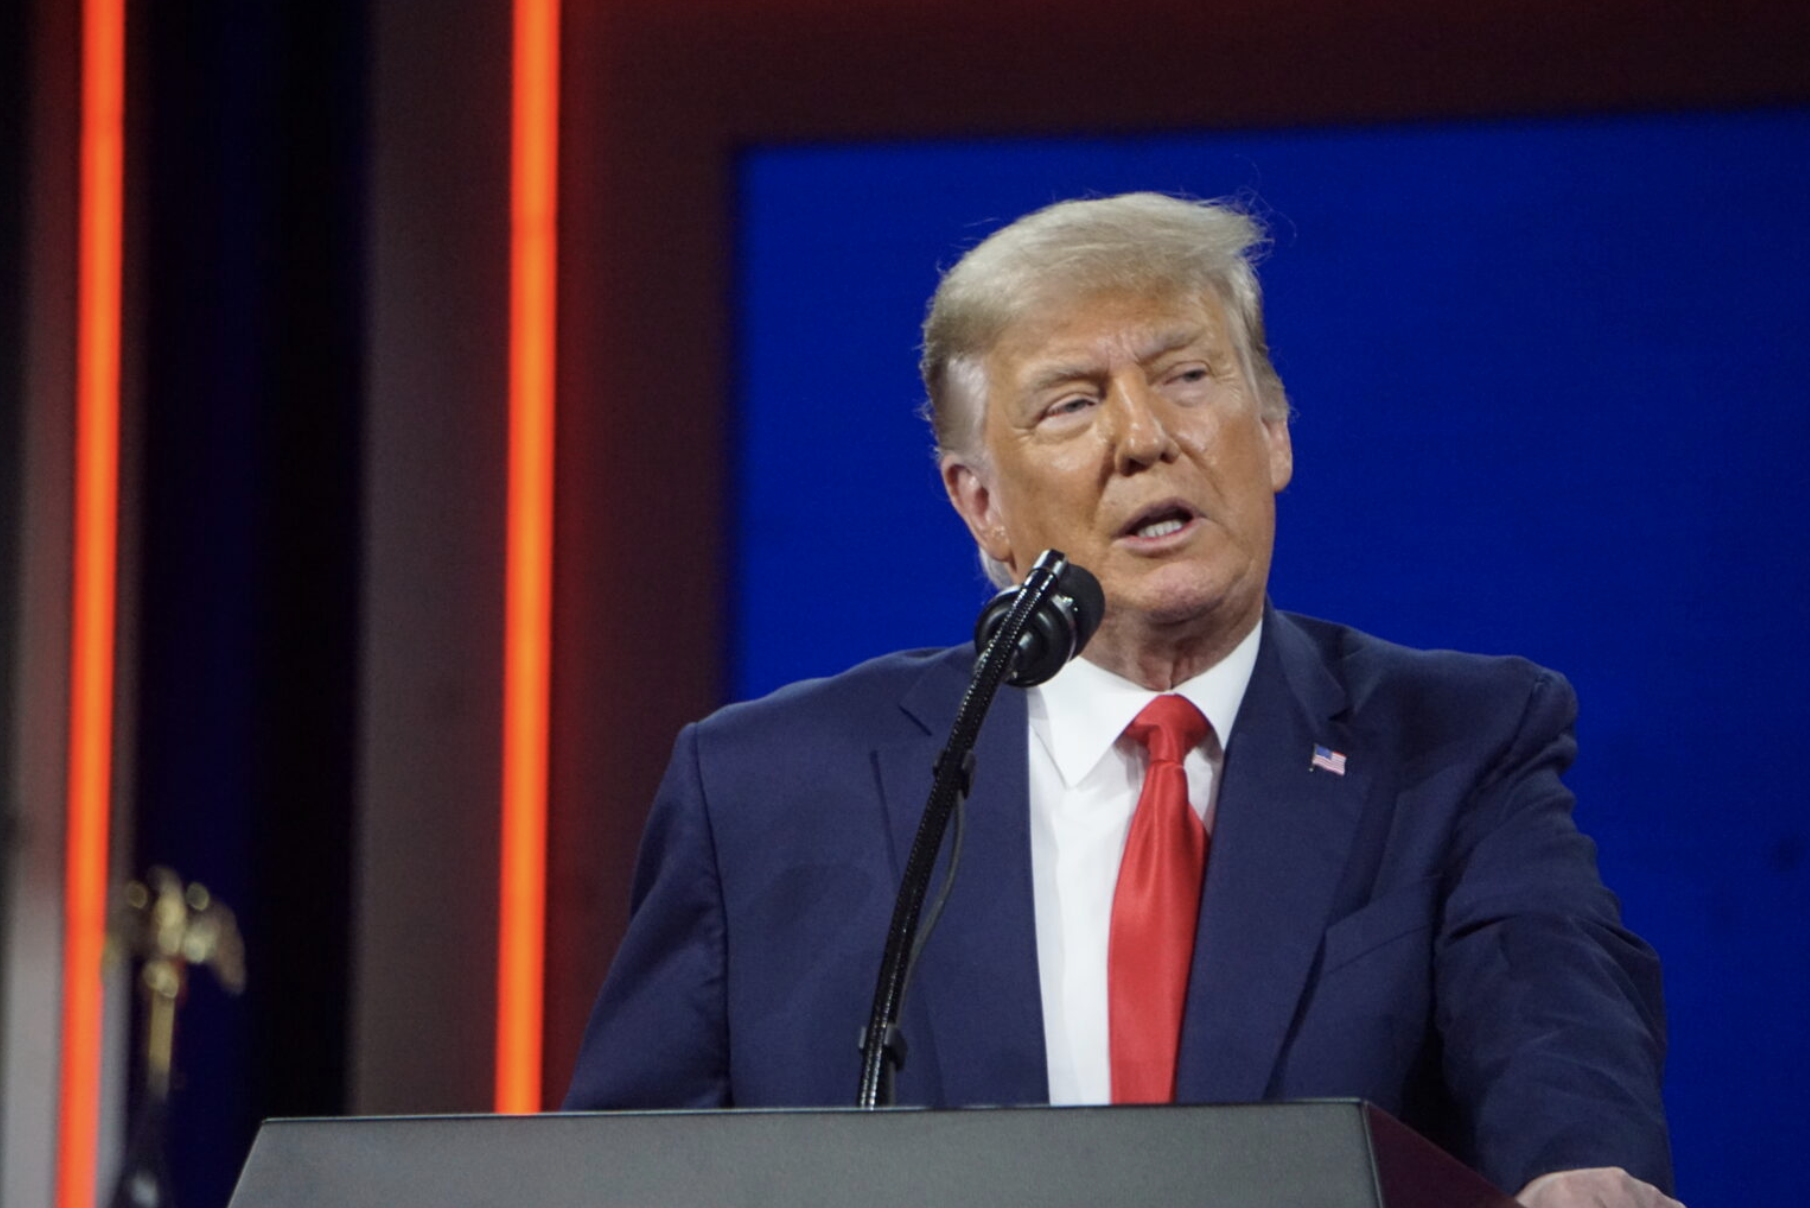 Trump At CPAC Says ‘The Incredible Journey’ Is ‘Far From Being Over’